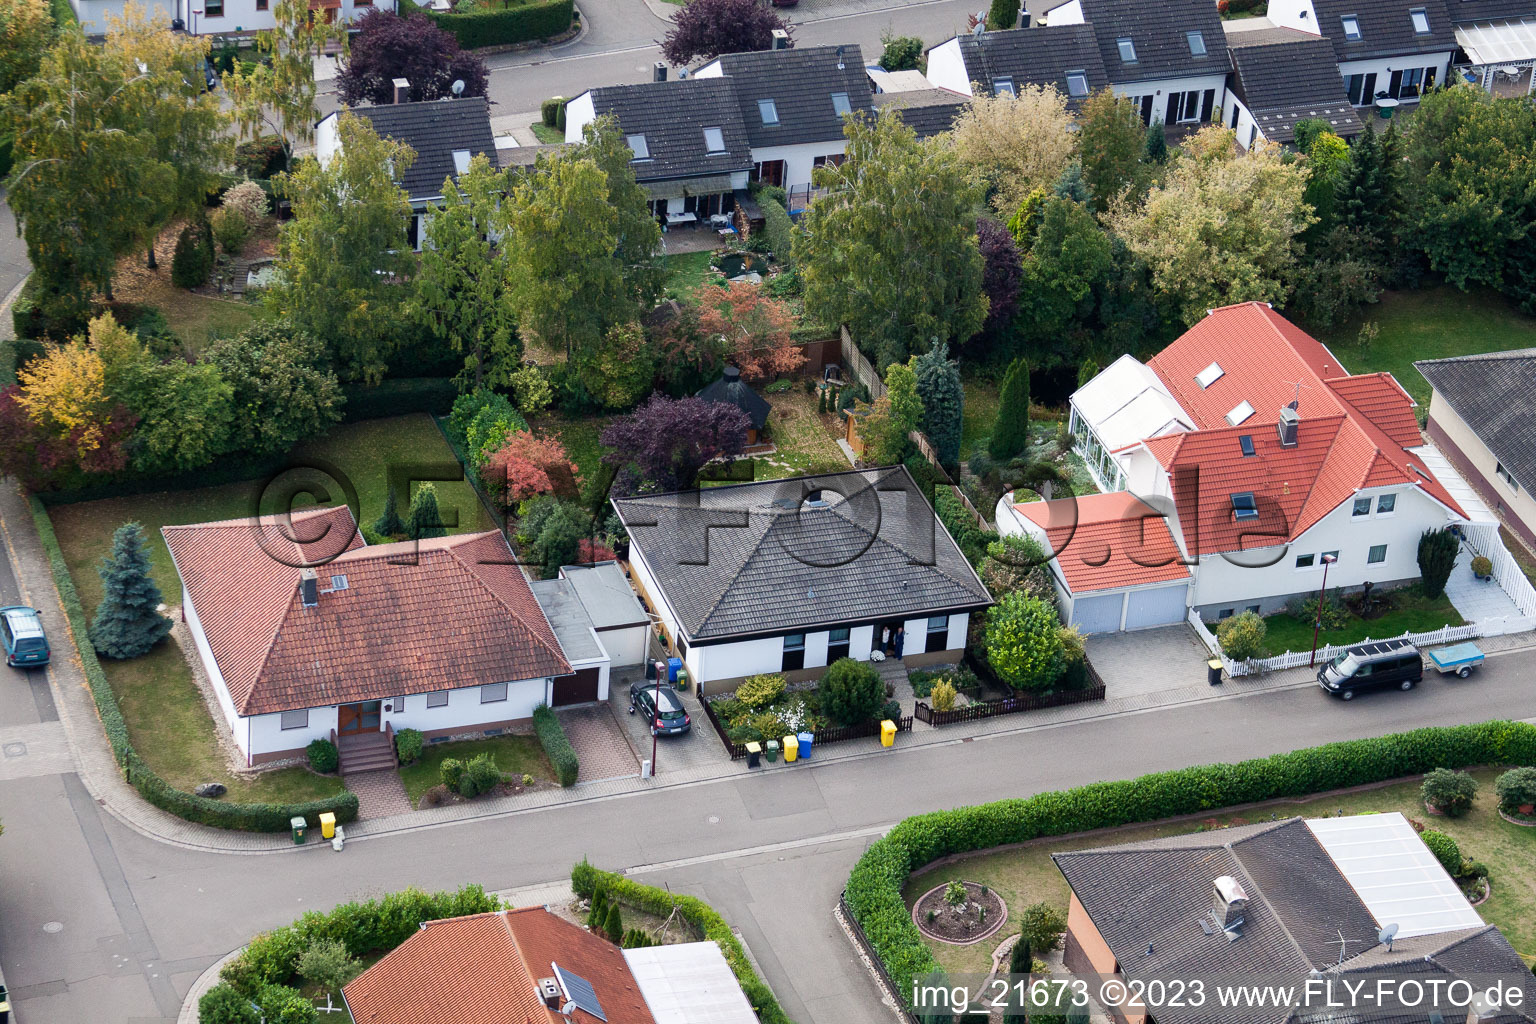 Aerial photograpy of Eppelsheim in the state Rhineland-Palatinate, Germany